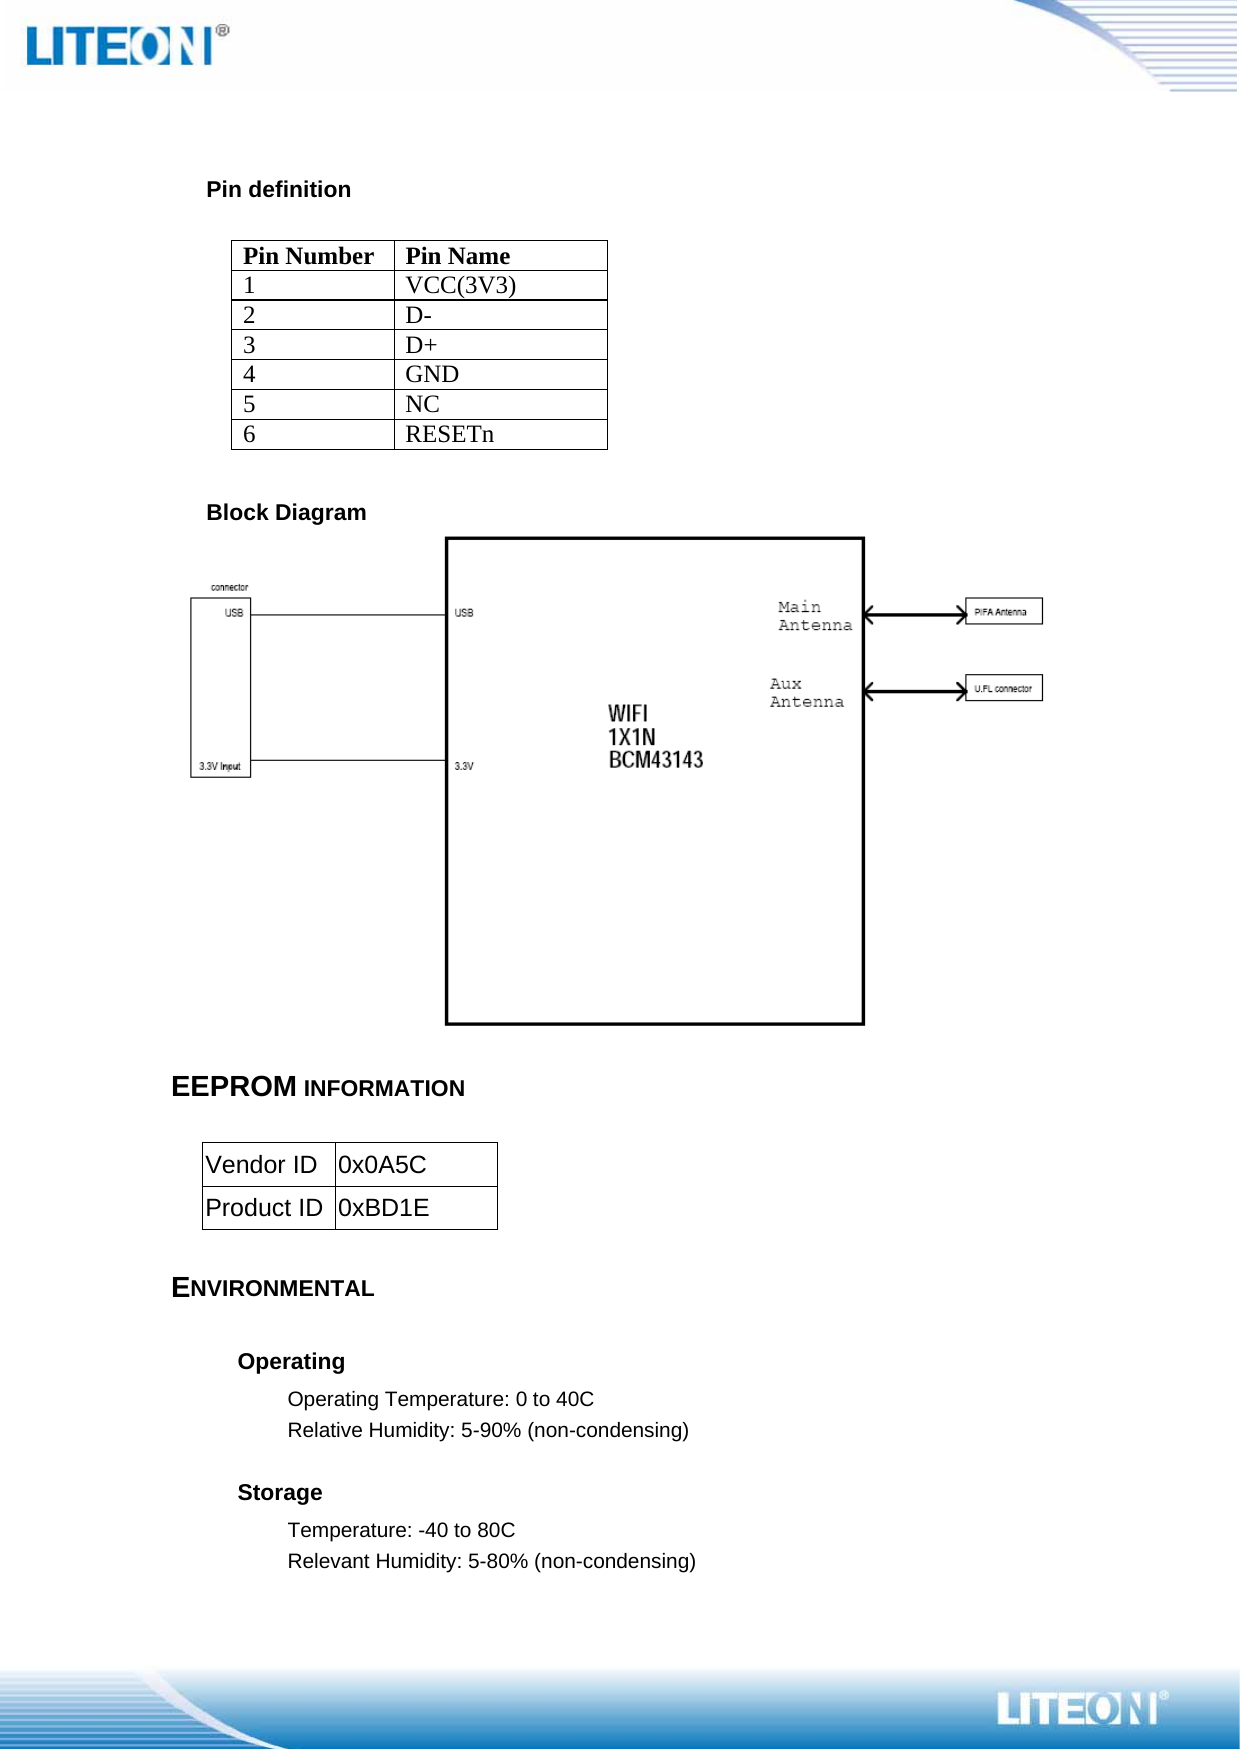    Pin definition  Pin Number Pin Name 1 VCC(3V3) 2 D- 3 D+ 4 GND 5 NC 6 RESETn  Block Diagram   EEPROM INFORMATION  Vendor ID  0x0A5C Product ID  0xBD1E  ENVIRONMENTAL  Operating   Operating Temperature: 0 to 40C   Relative Humidity: 5-90% (non-condensing)  Storage   Temperature: -40 to 80C Relevant Humidity: 5-80% (non-condensing) 